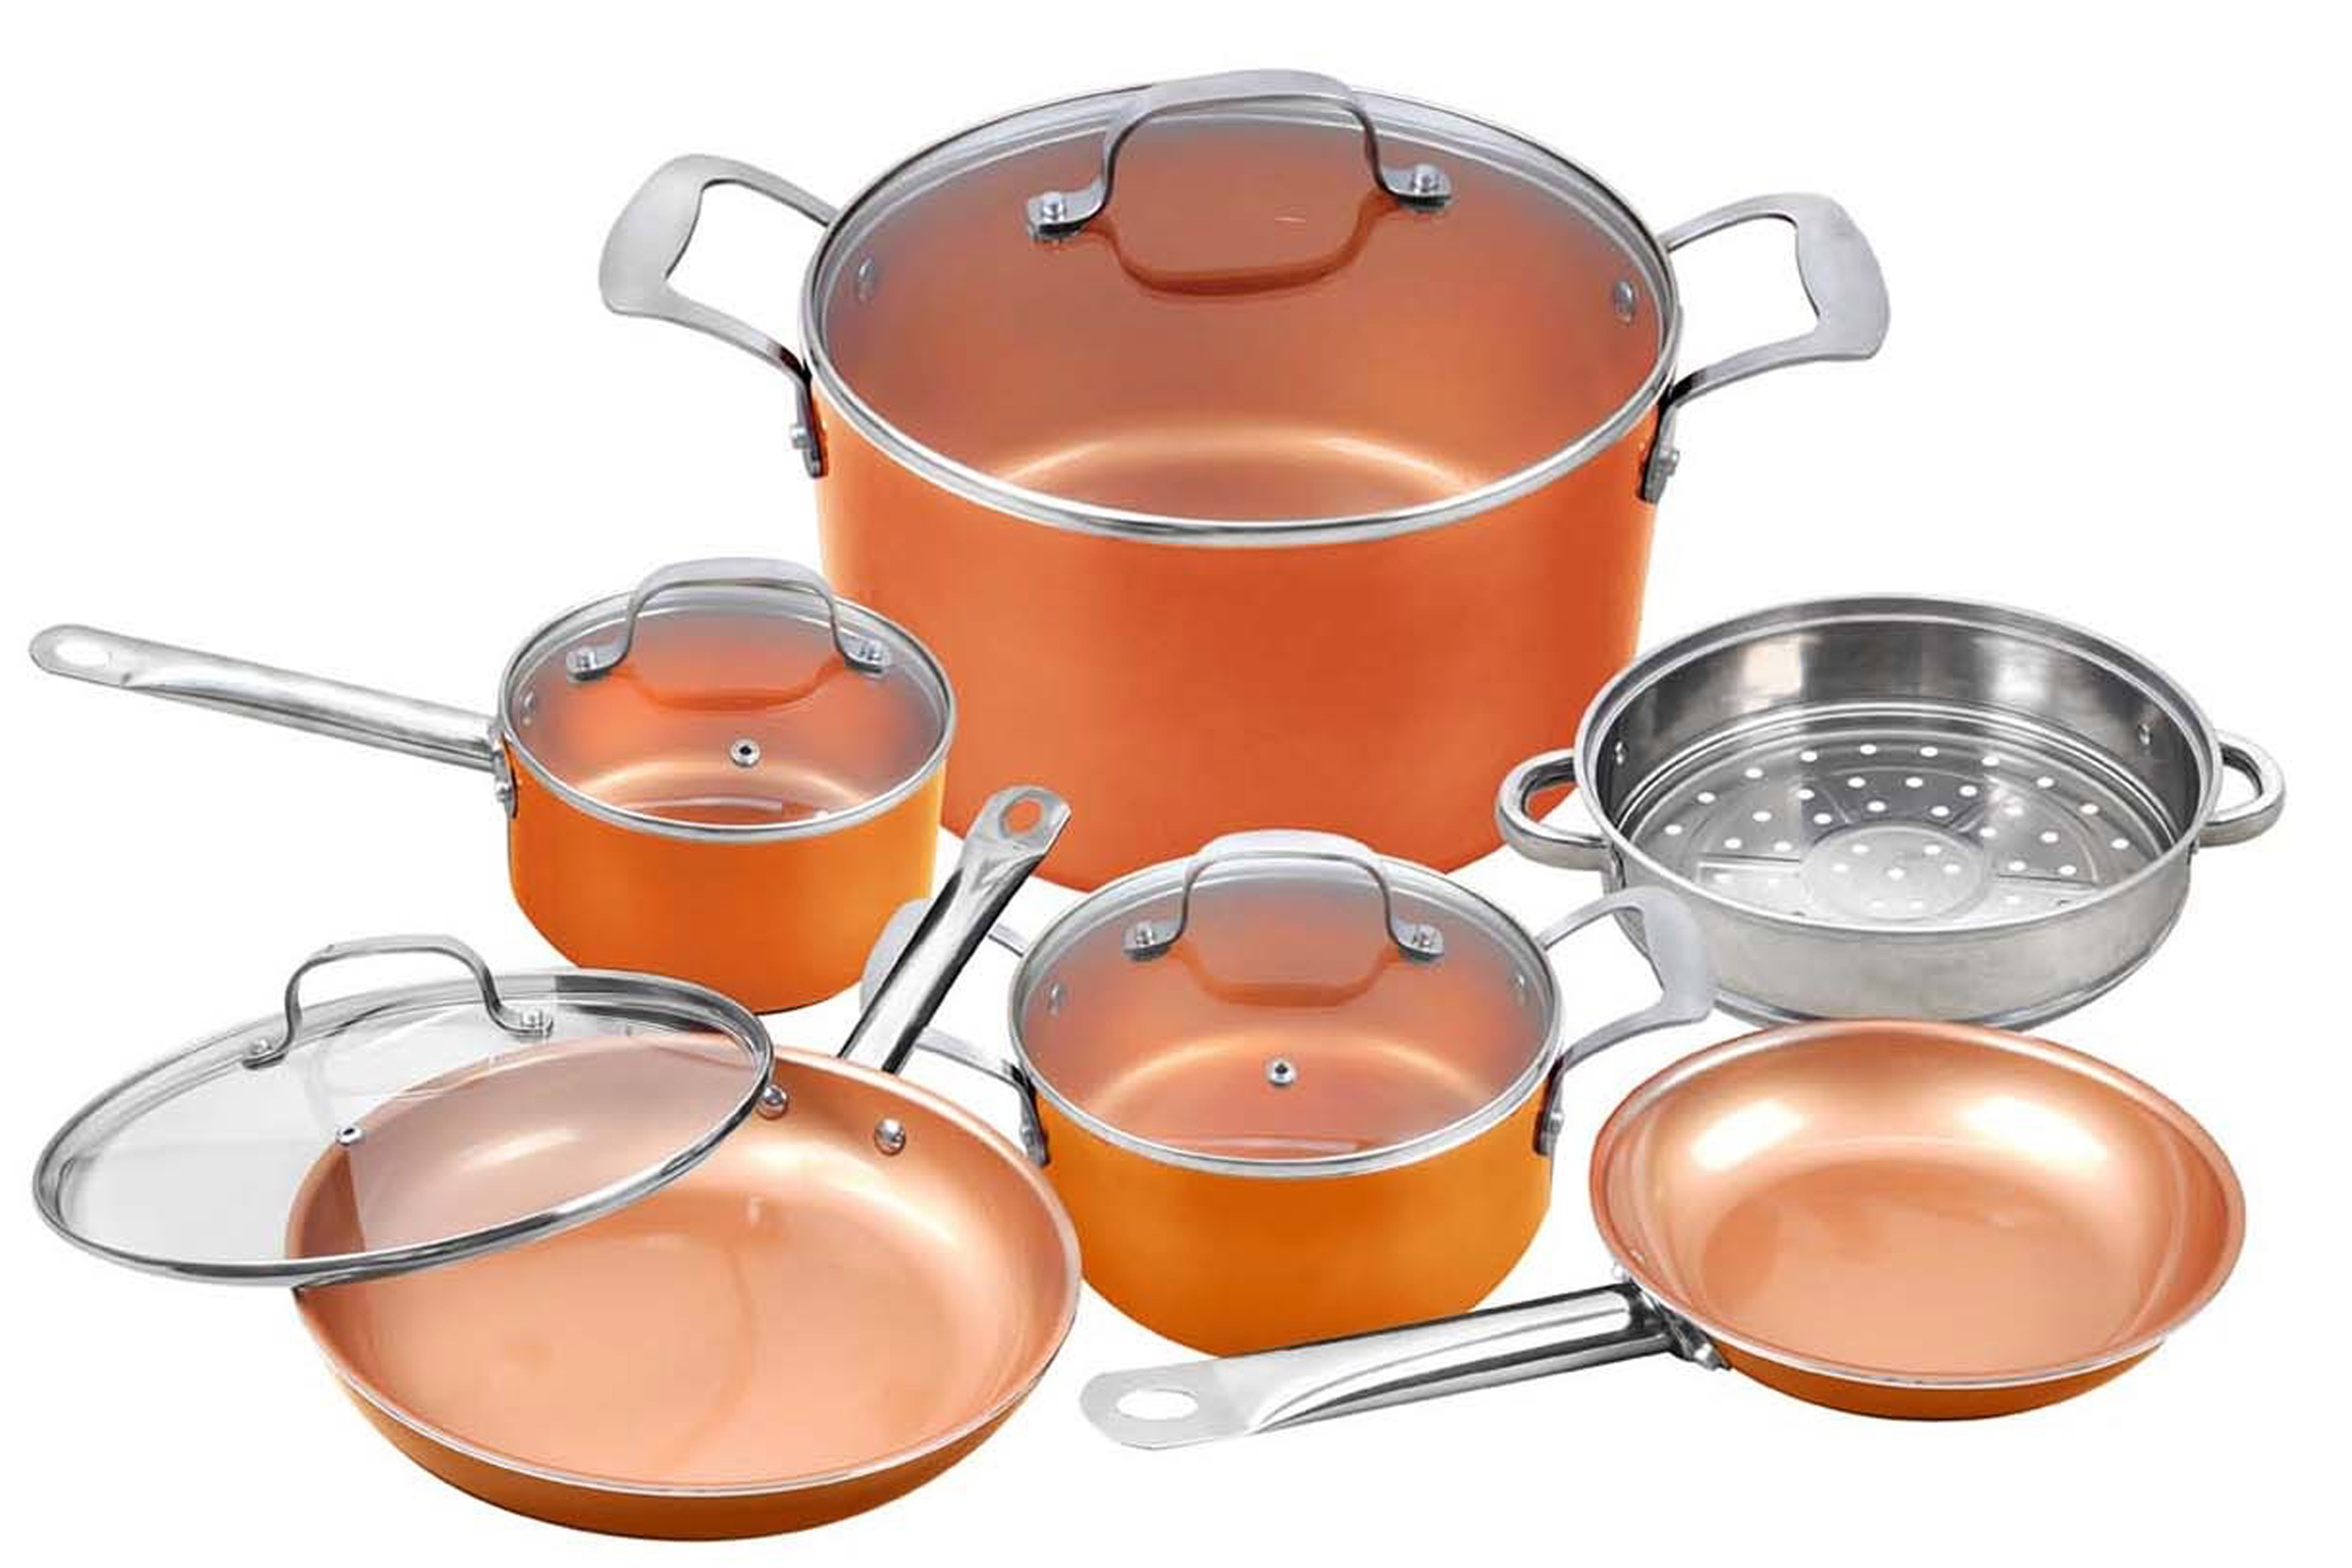 10PC Copper Cookware Set With Stainless Steel Handle ...